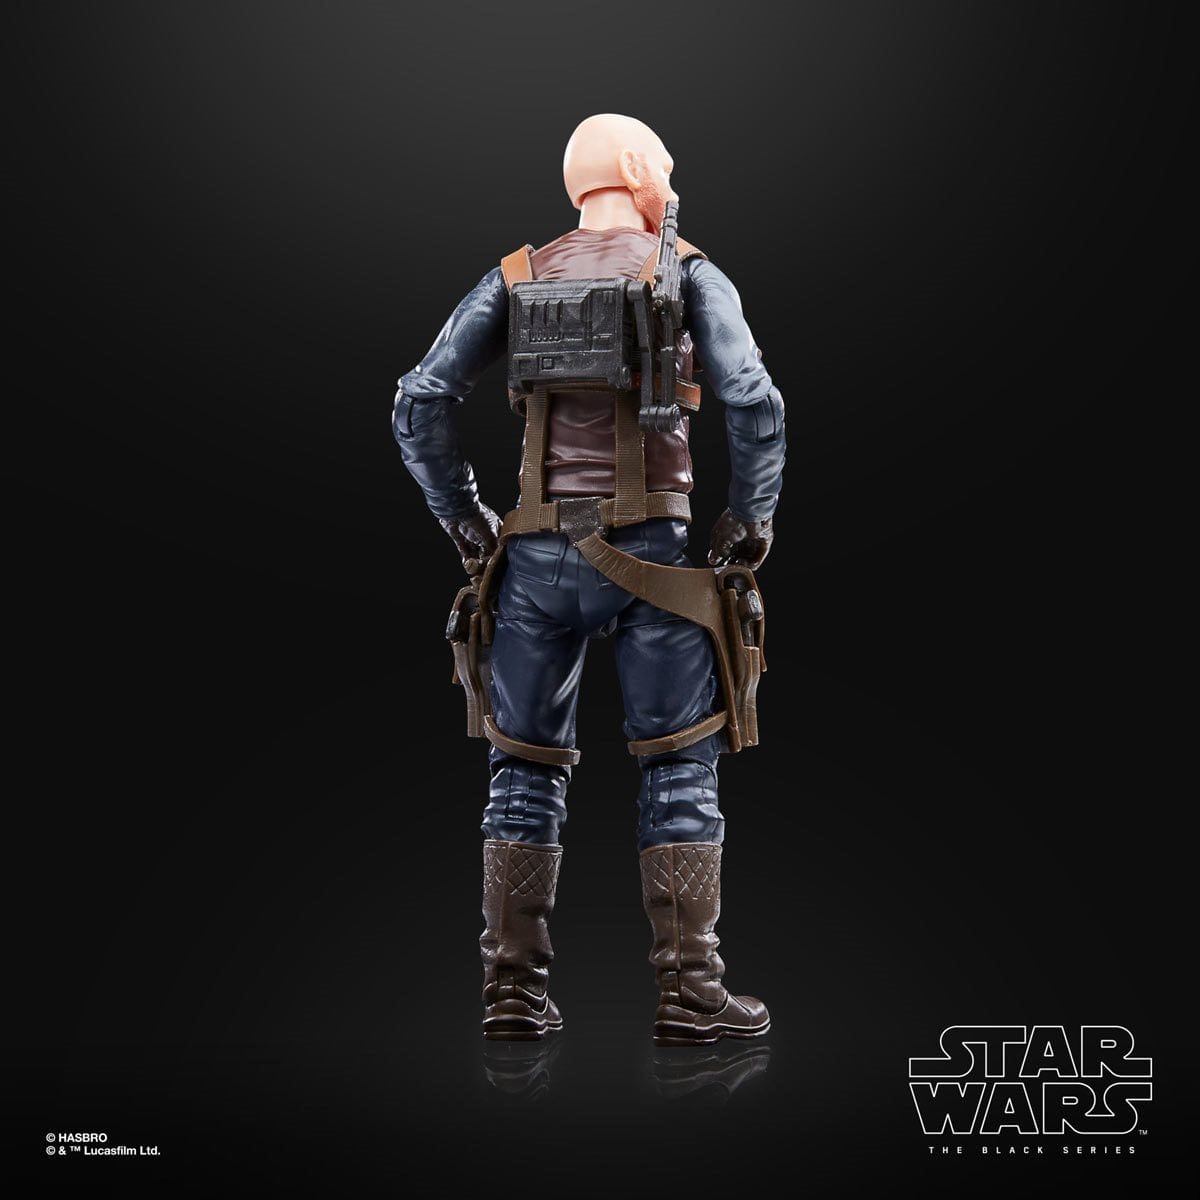 Star Wars The Black Series Migs Mayfeld 6" Action Figure Pop-O-Loco